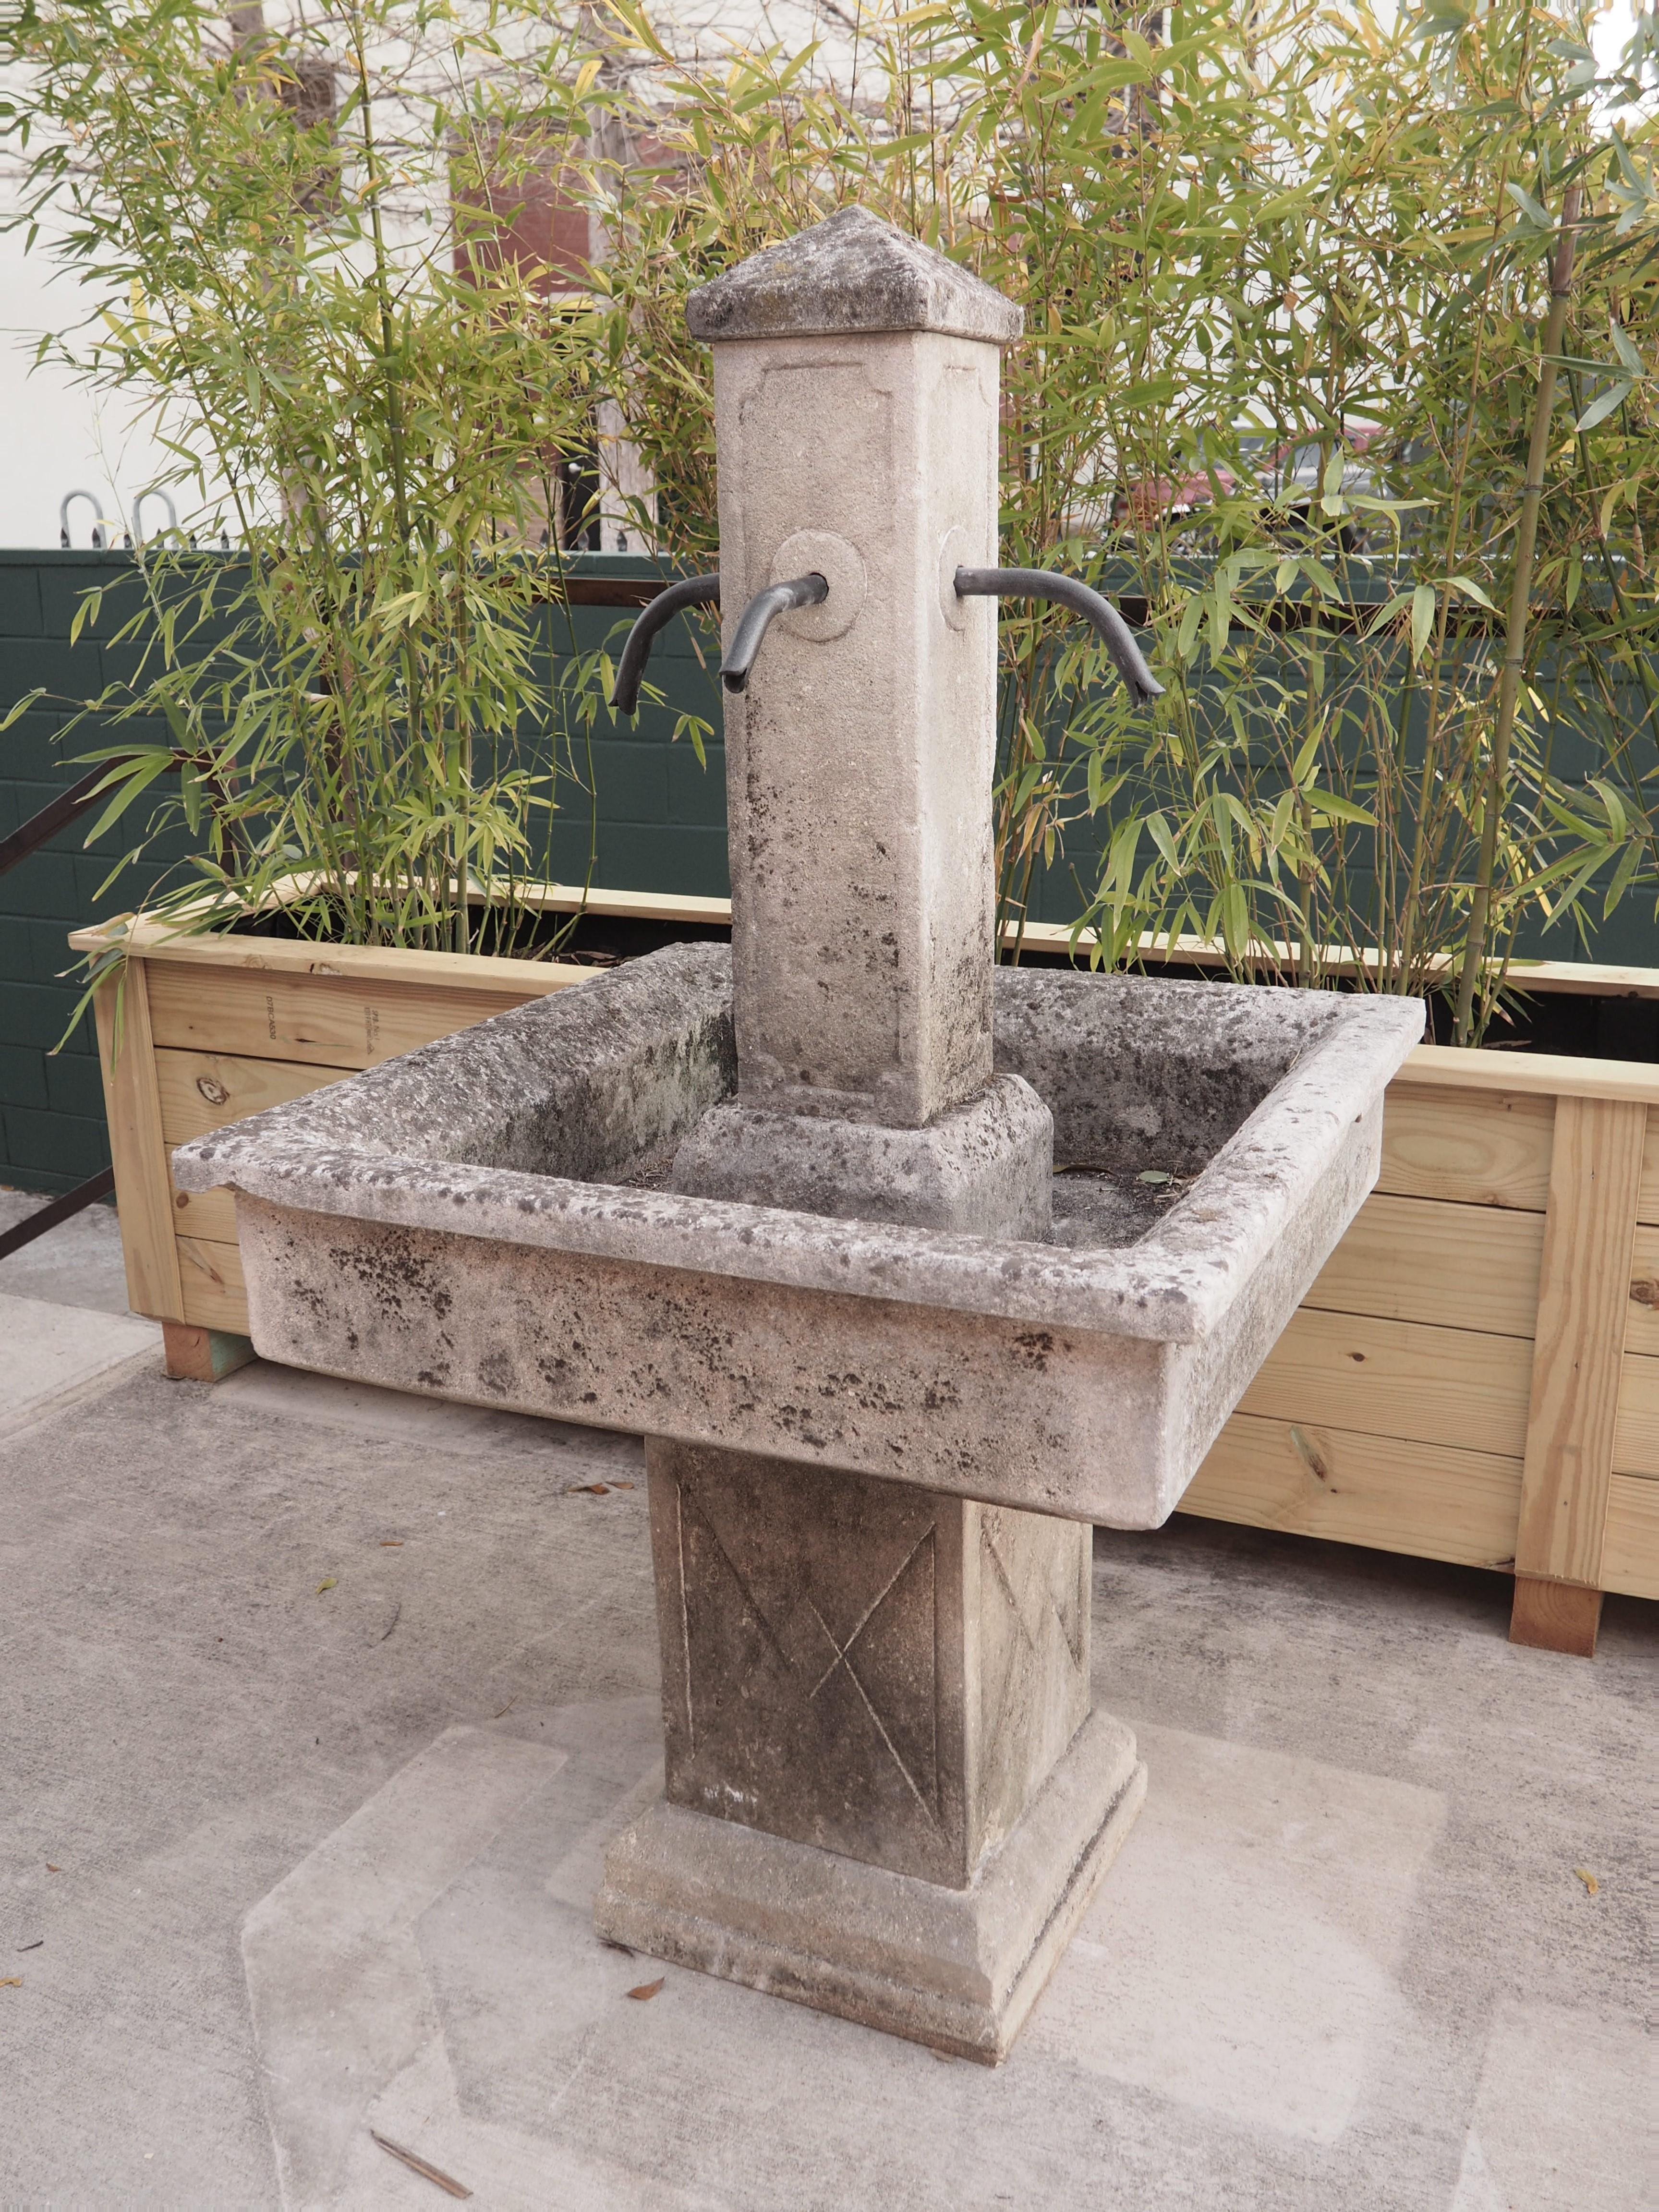 Our unique standing center fountain has an elevated basin above a rectangular pedestal. A rectangular column with a pyramid finial rises from the center of the five-inch-high square basin. Each side of the column has an elongated rectangular molding